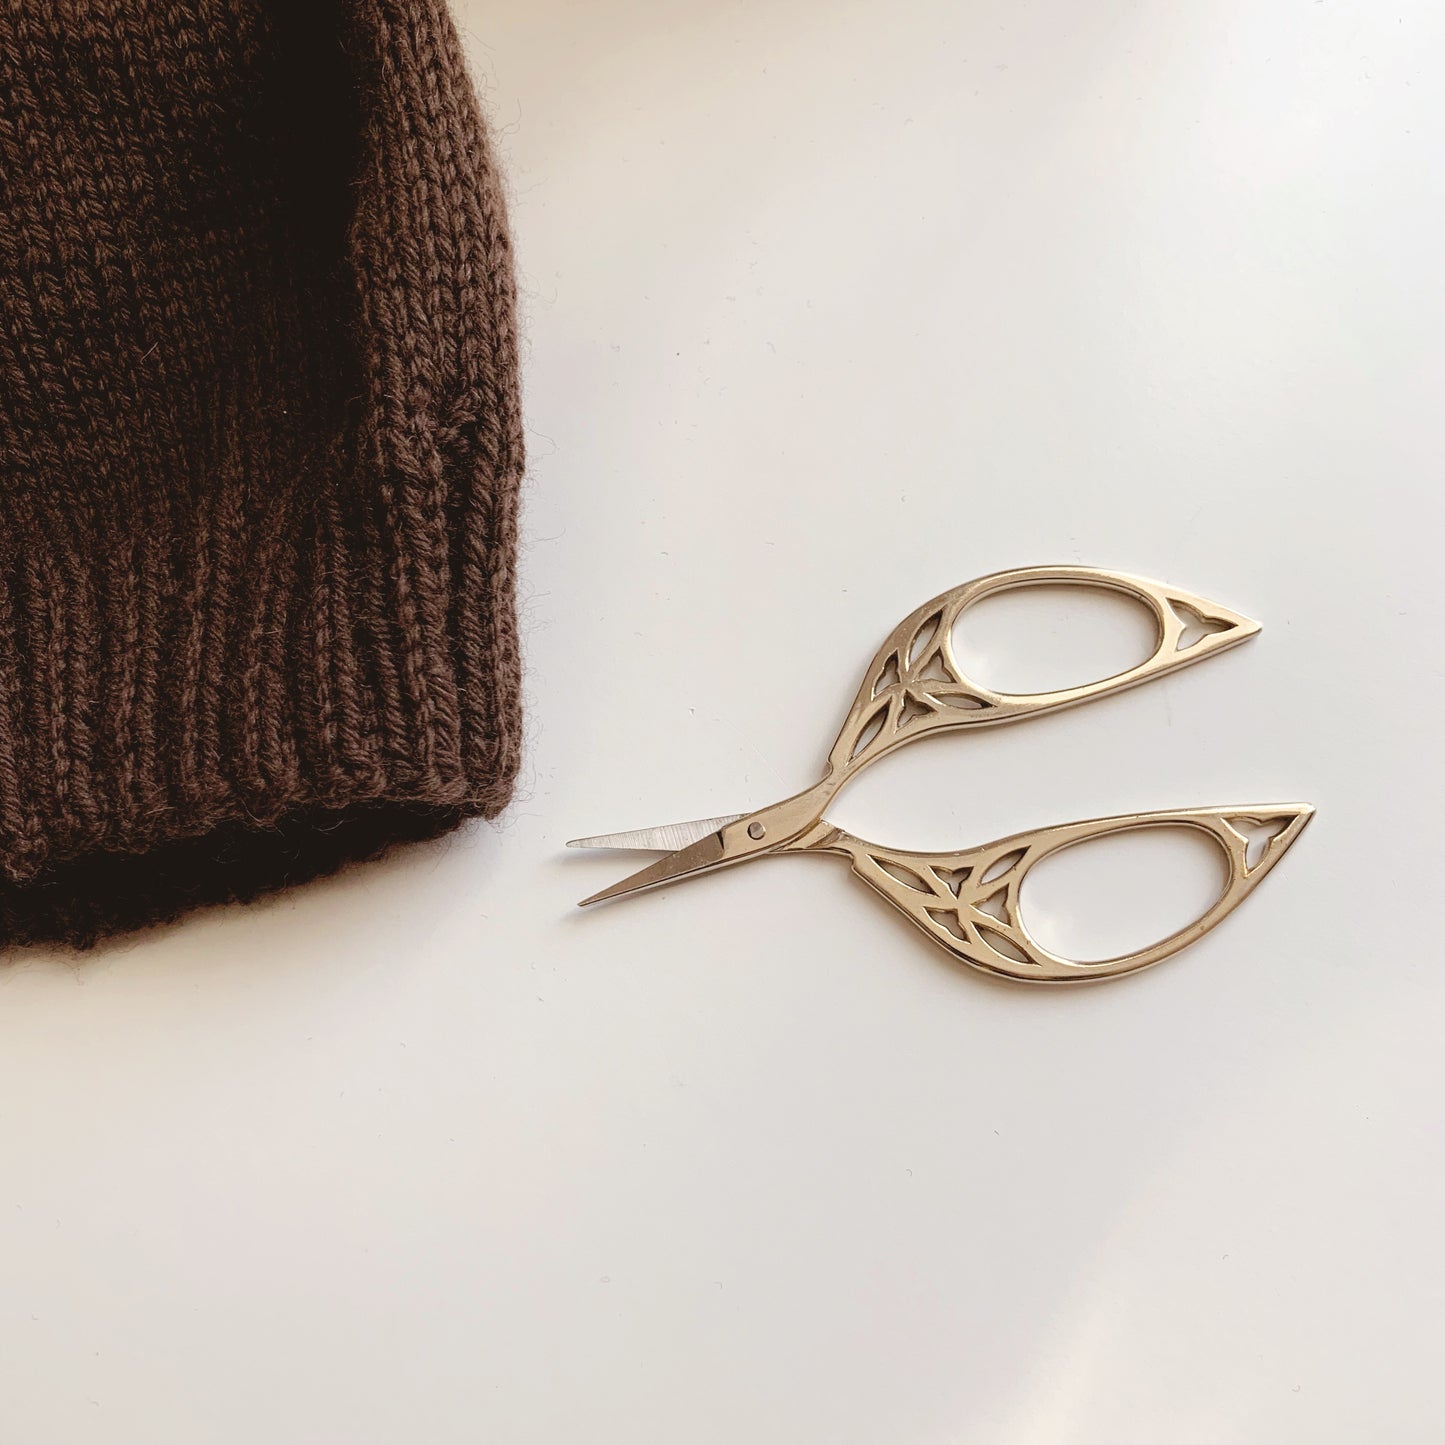 Galadriel Antiqued Gold Stainless Steel Embroidery Scissors